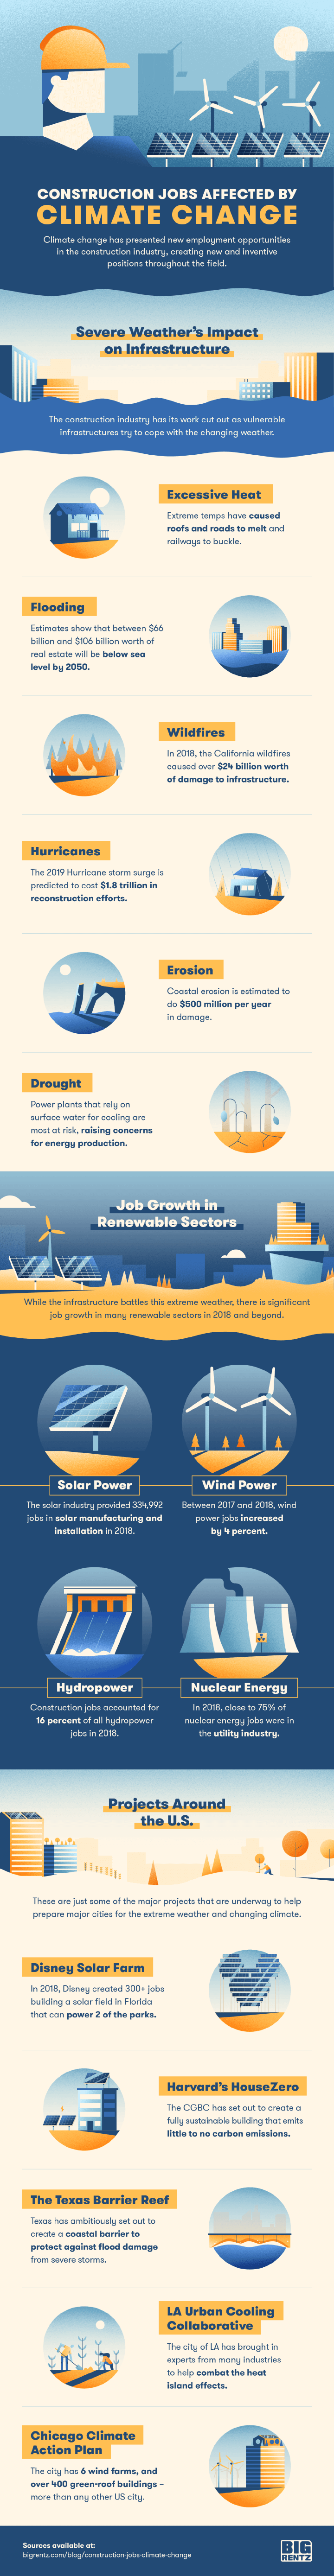 Construction Jobs and Climate Change Infographic